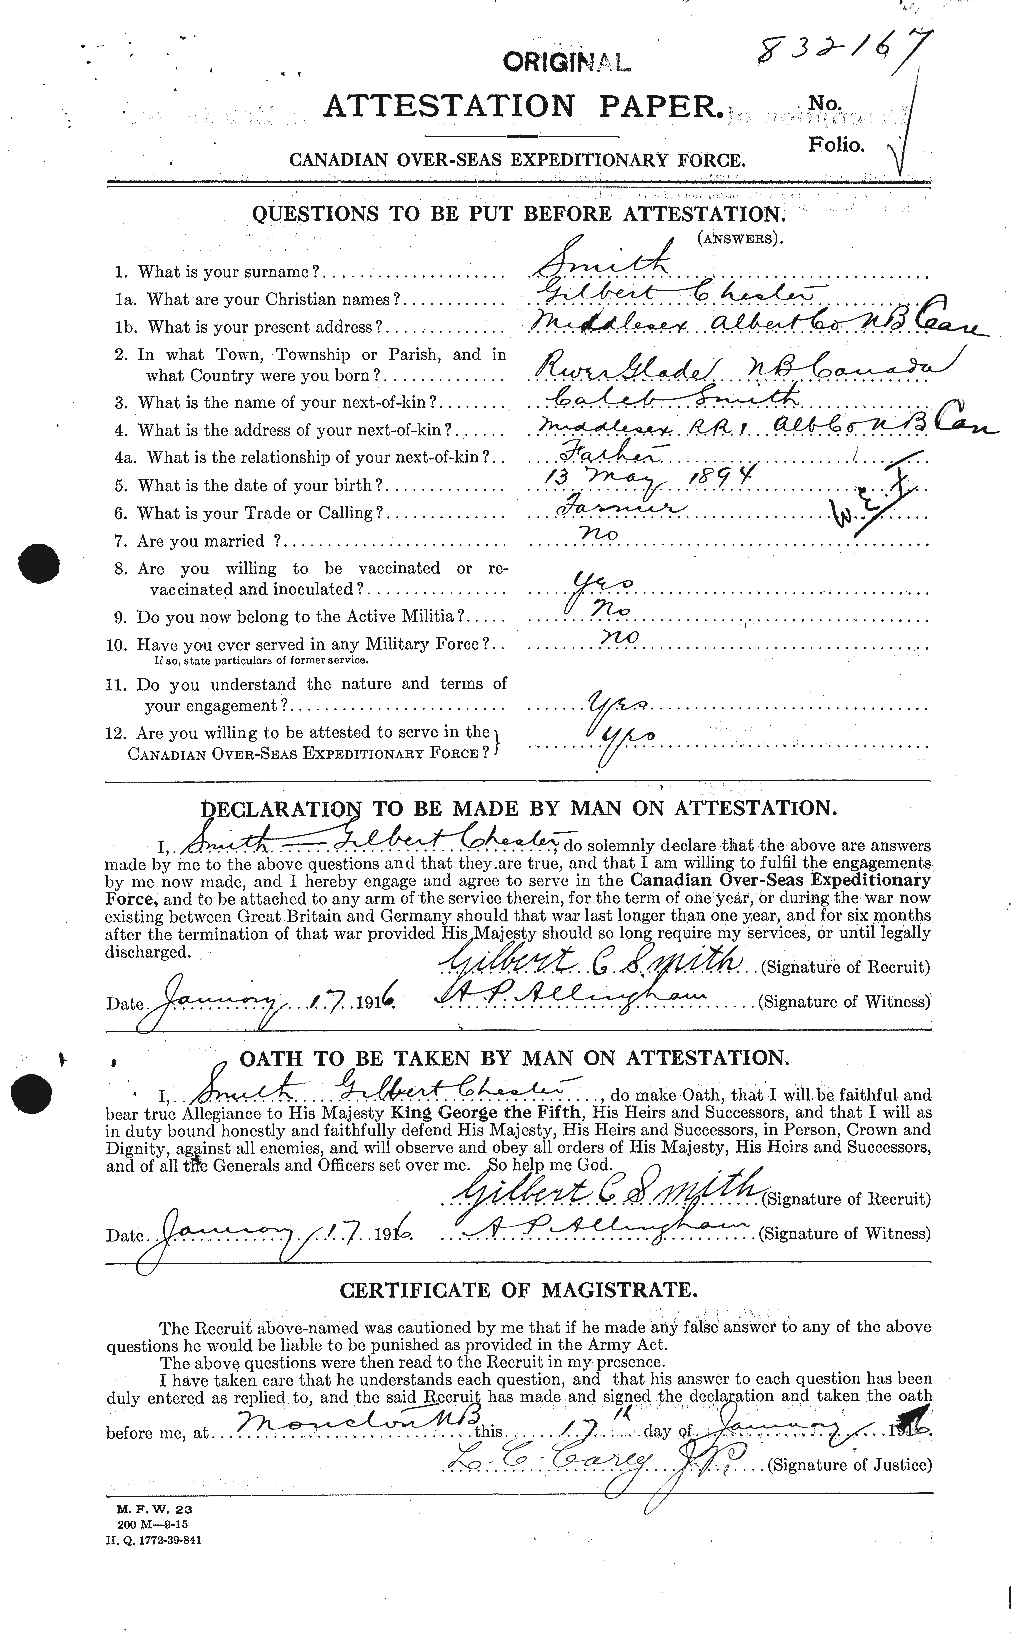 Personnel Records of the First World War - CEF 101510a